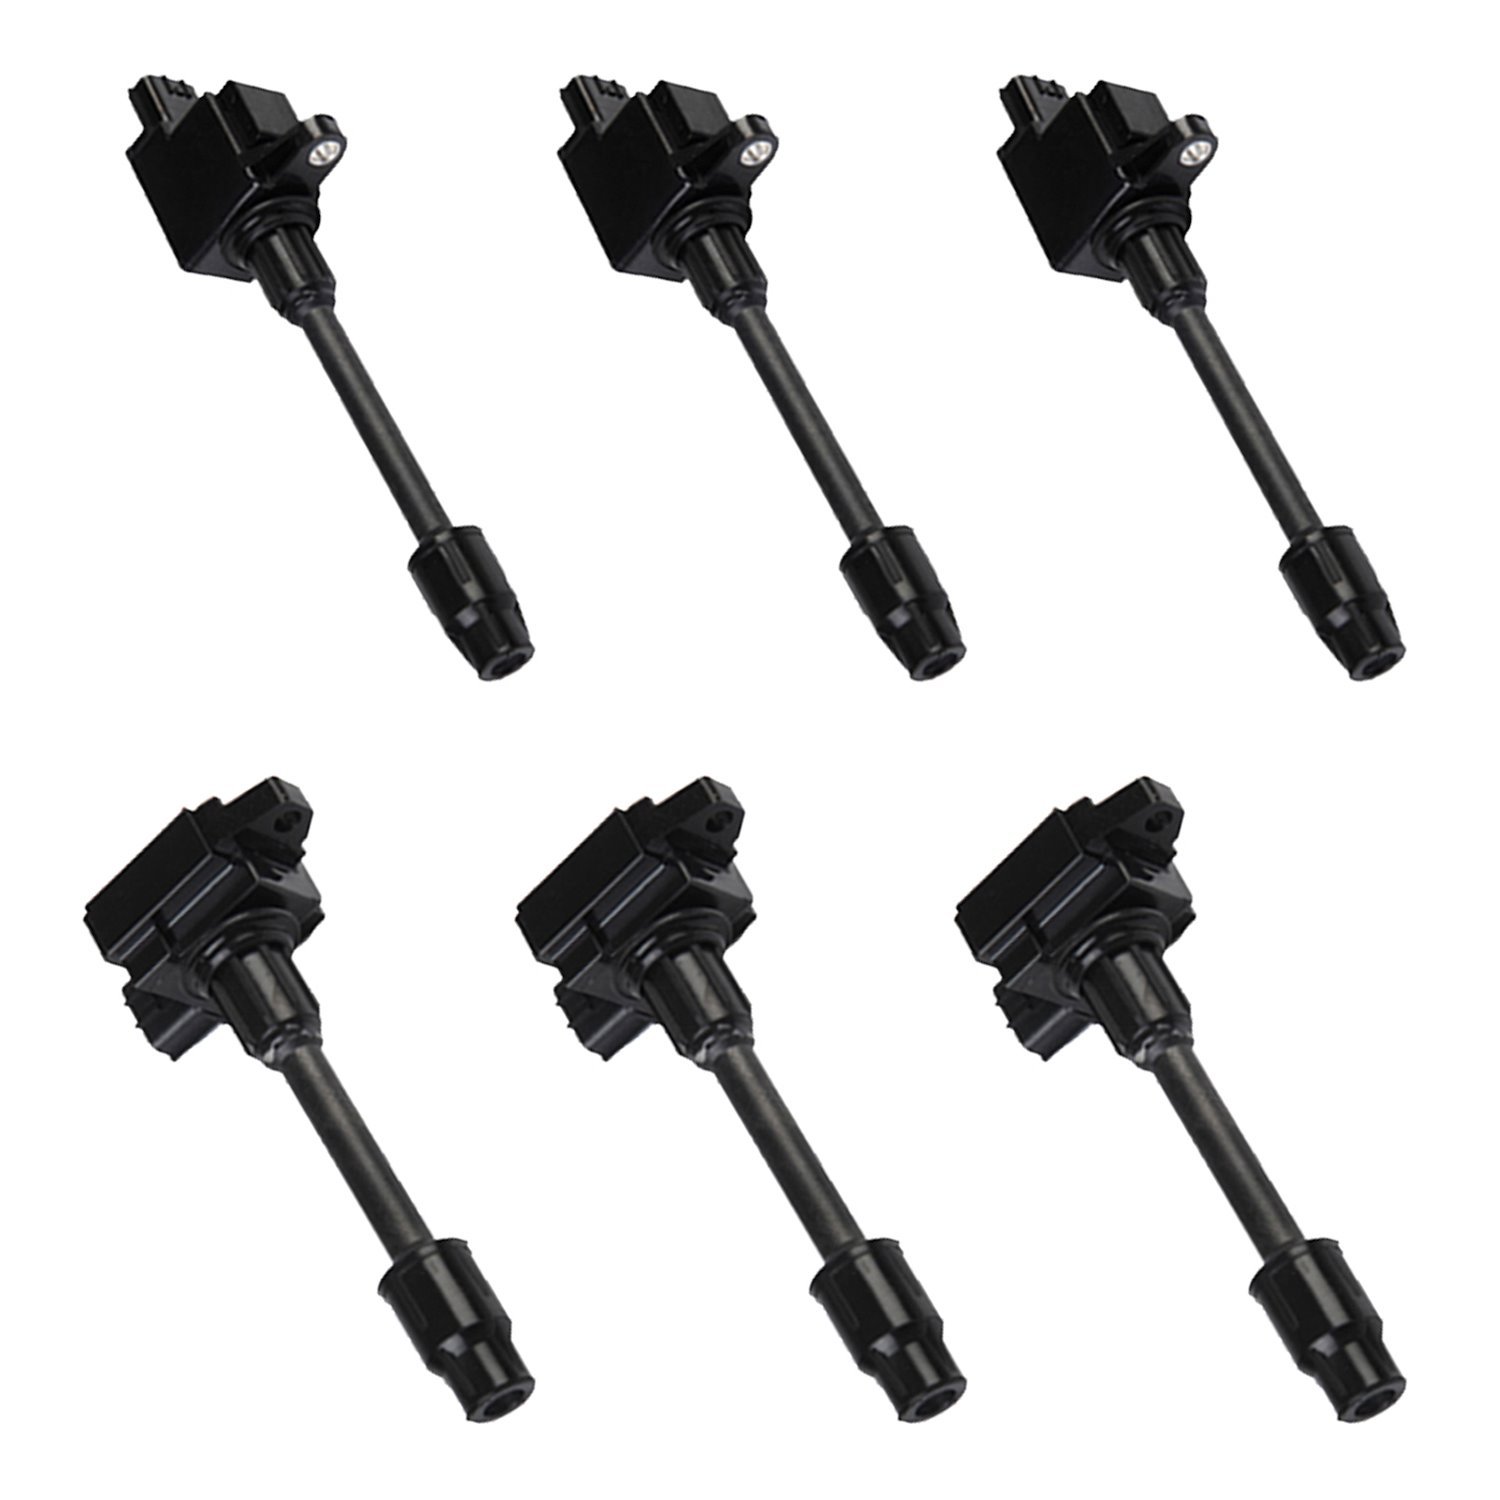 OE Replacement Ignition Coils for 2000-2001 Infiniti I30, Nissan Maxima V6 3.0L [Black]